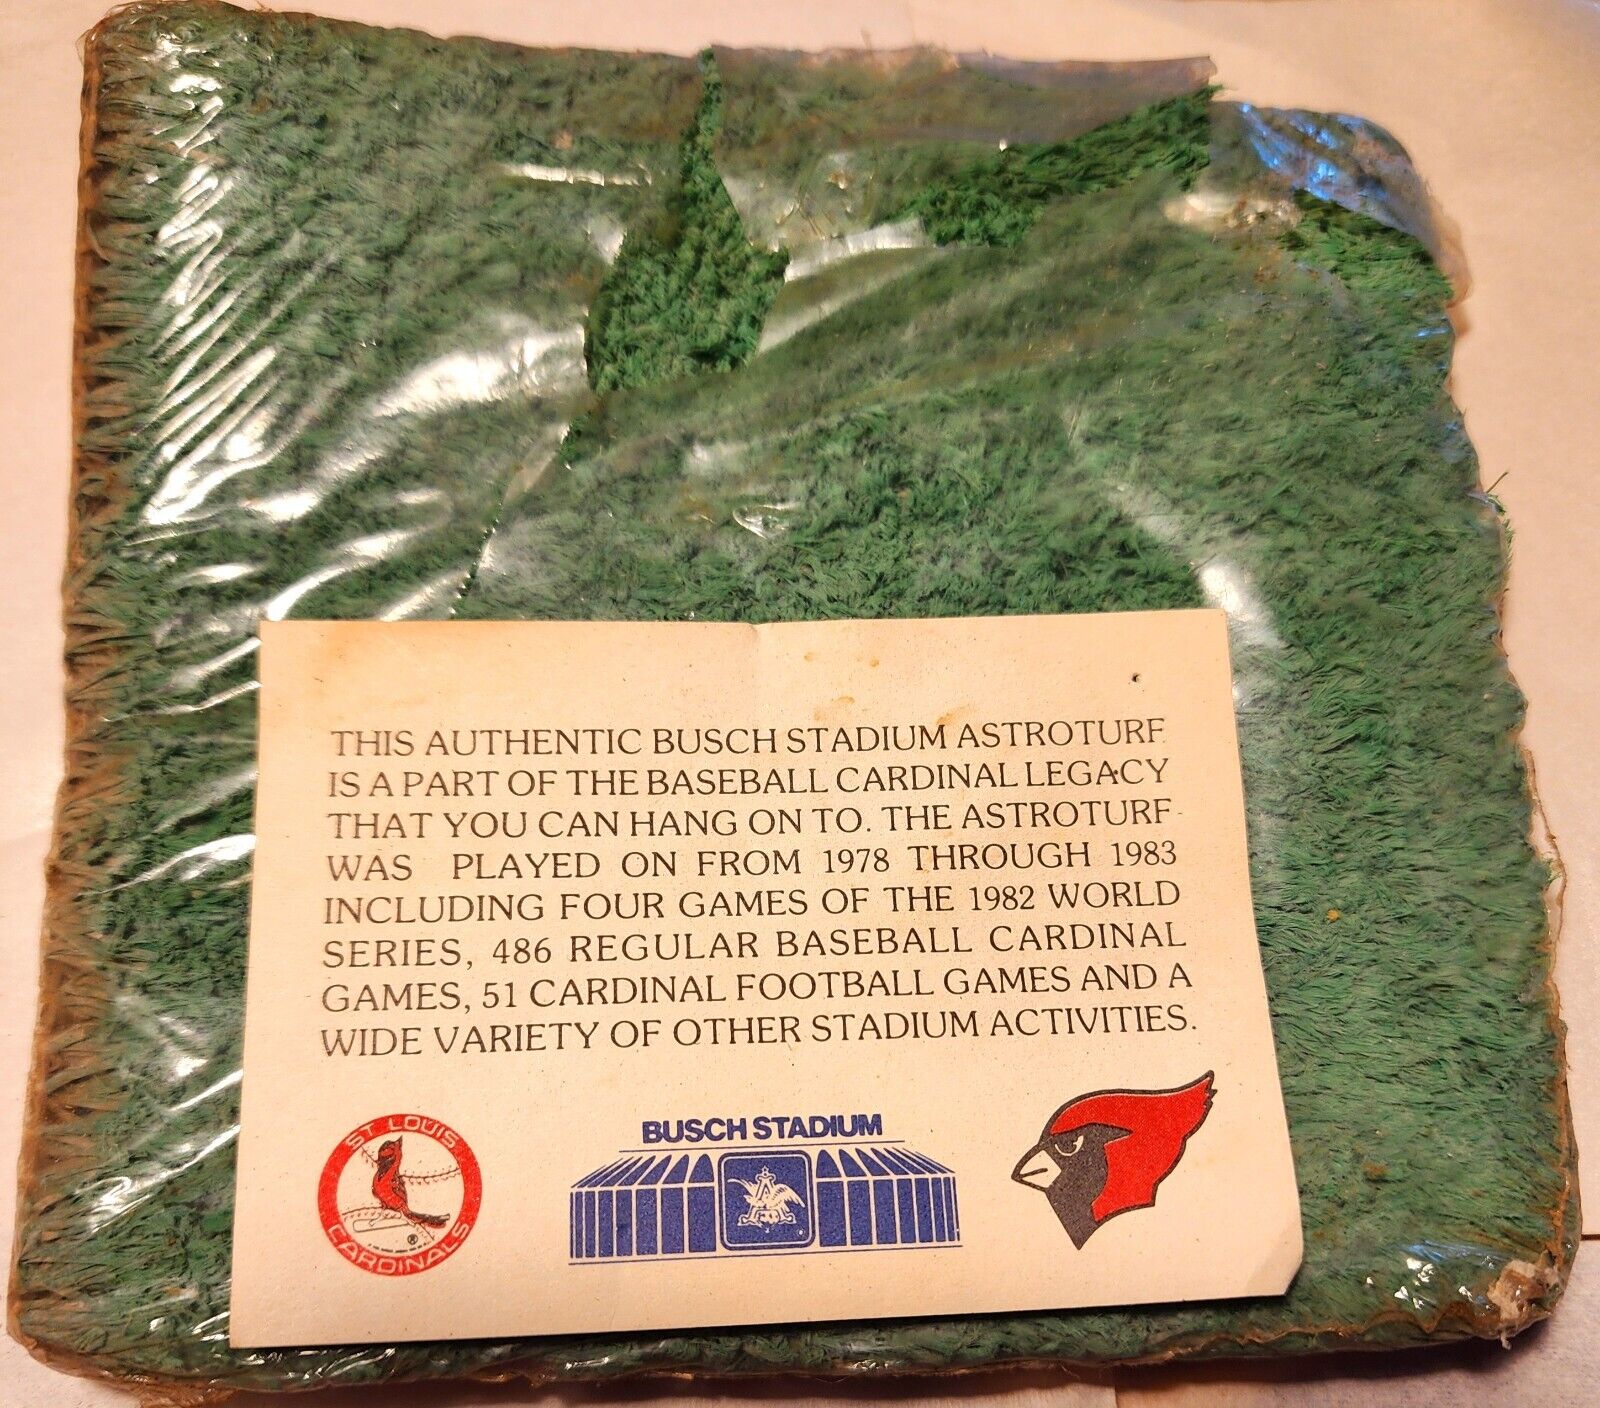 Authentic Busch Stadium Astroturf Played On From 1978 To 1983 By The Cardinals